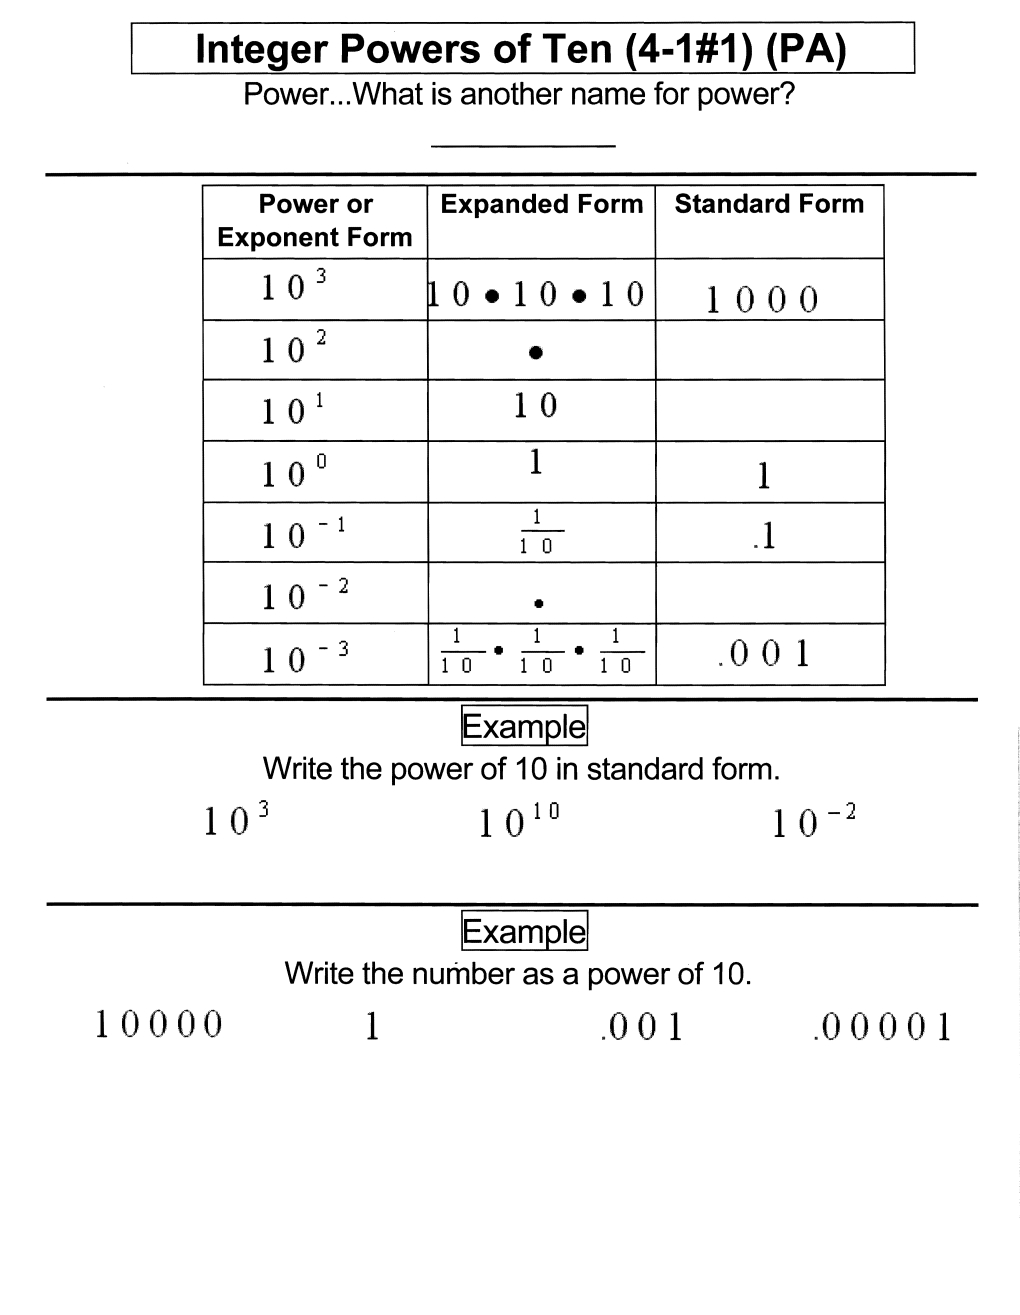 Integer Powers of Ten (4-1#1) (PA) Power...What Is Another Name for Power?